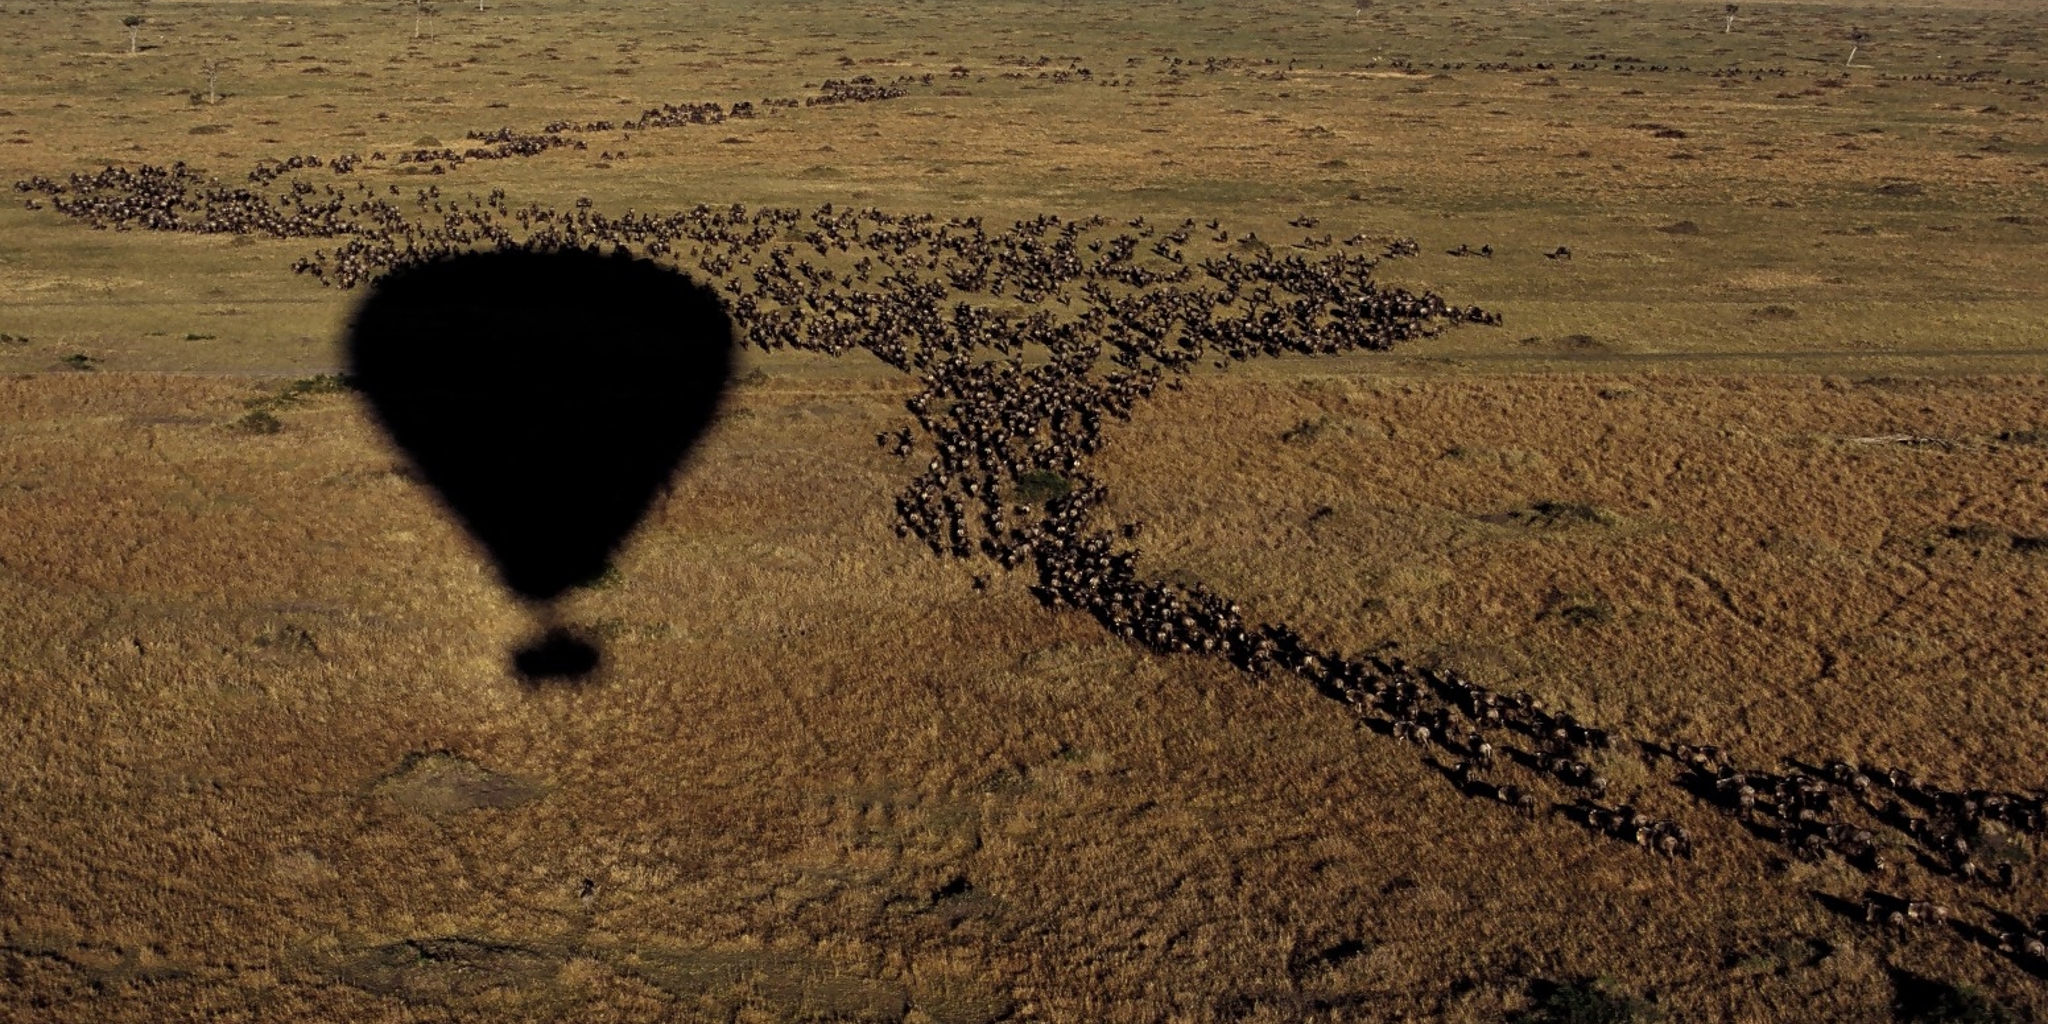 Migration from a baloon